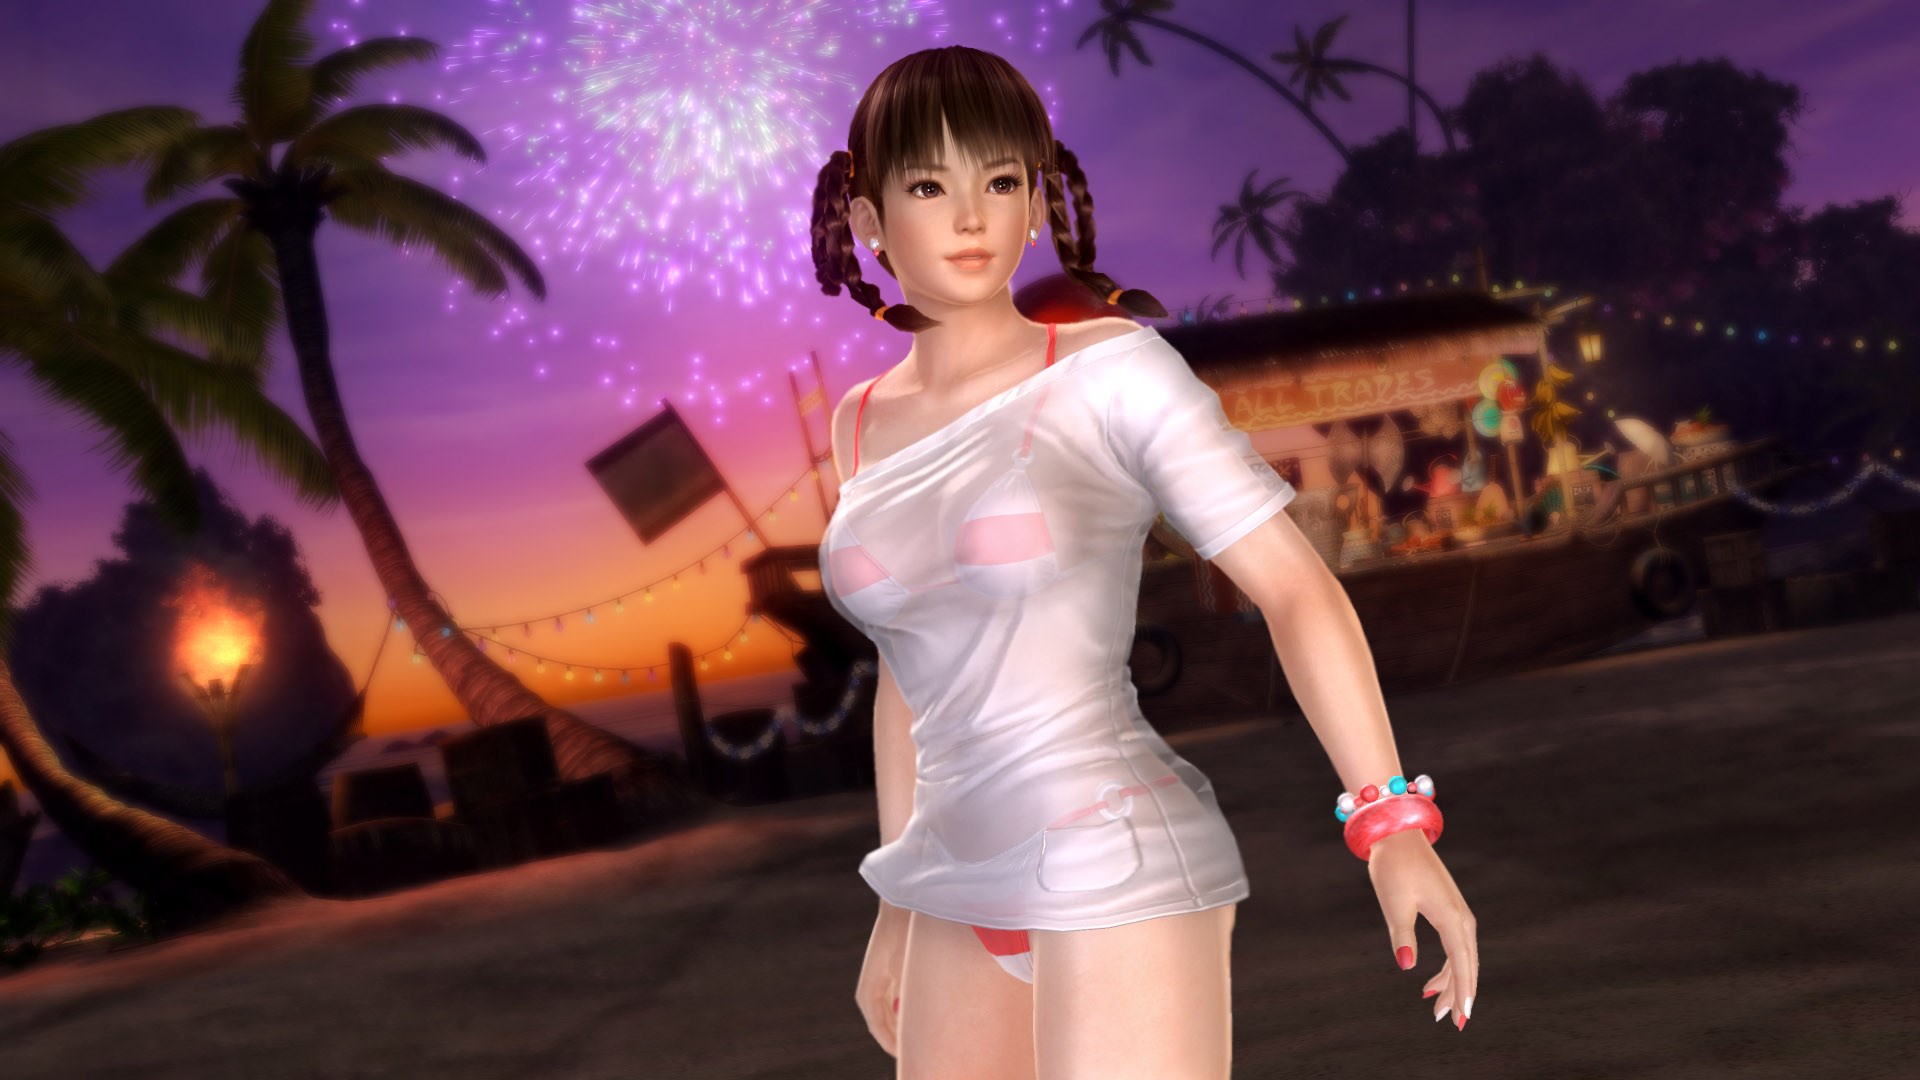 Реалистичные игры 18. Dead or Alive 3 игра. Leifang Doa 5. Dead or Alive Xtreme 3 Leifang. Dead or Alive 5.